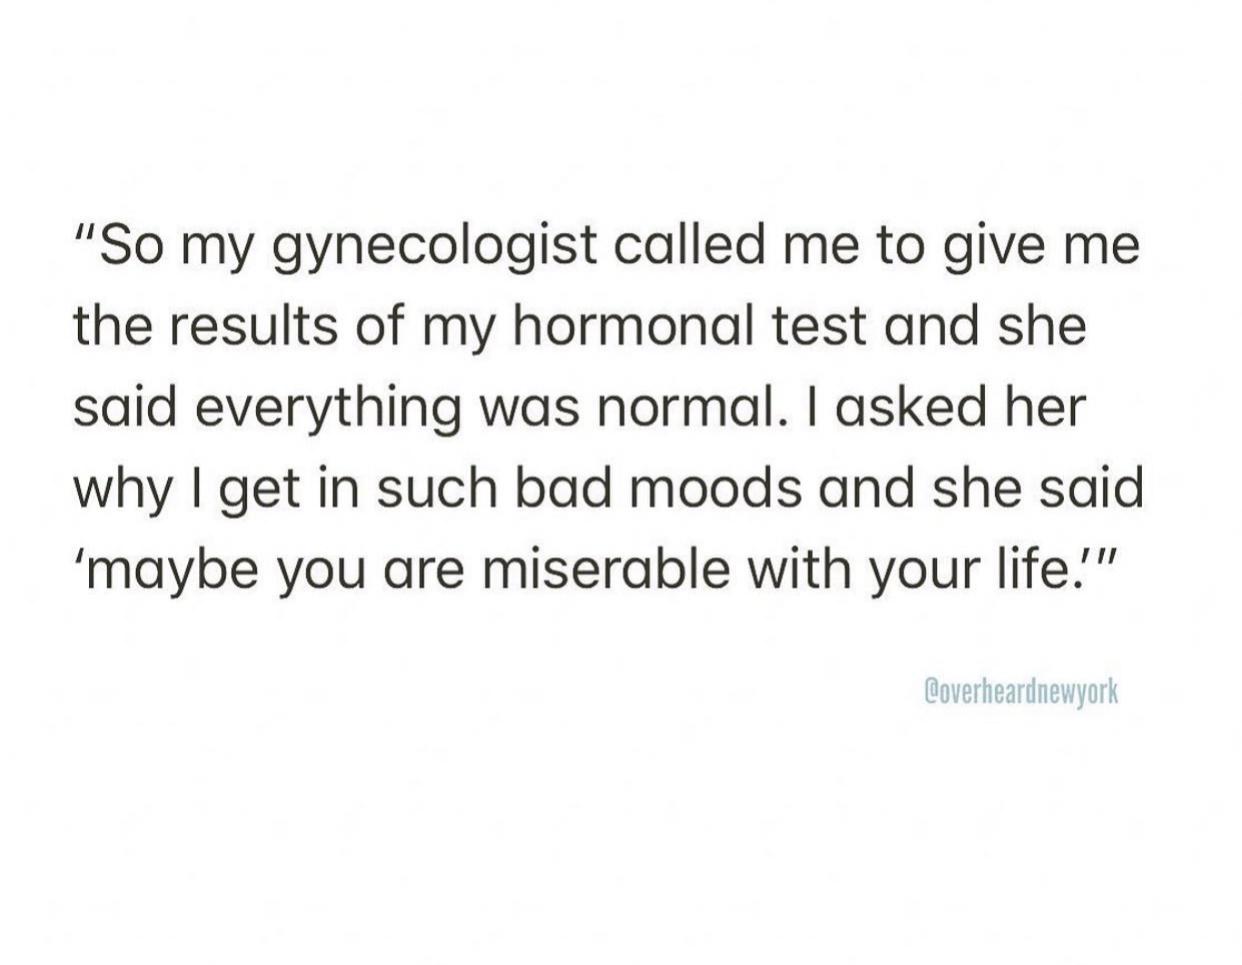 it's never the right time quotes - "So my gynecologist called me to give me the results of my hormonal test and she said everything was normal. I asked her why I get in such bad moods and she said 'maybe you are miserable with your life.'" Coverheardnewyo